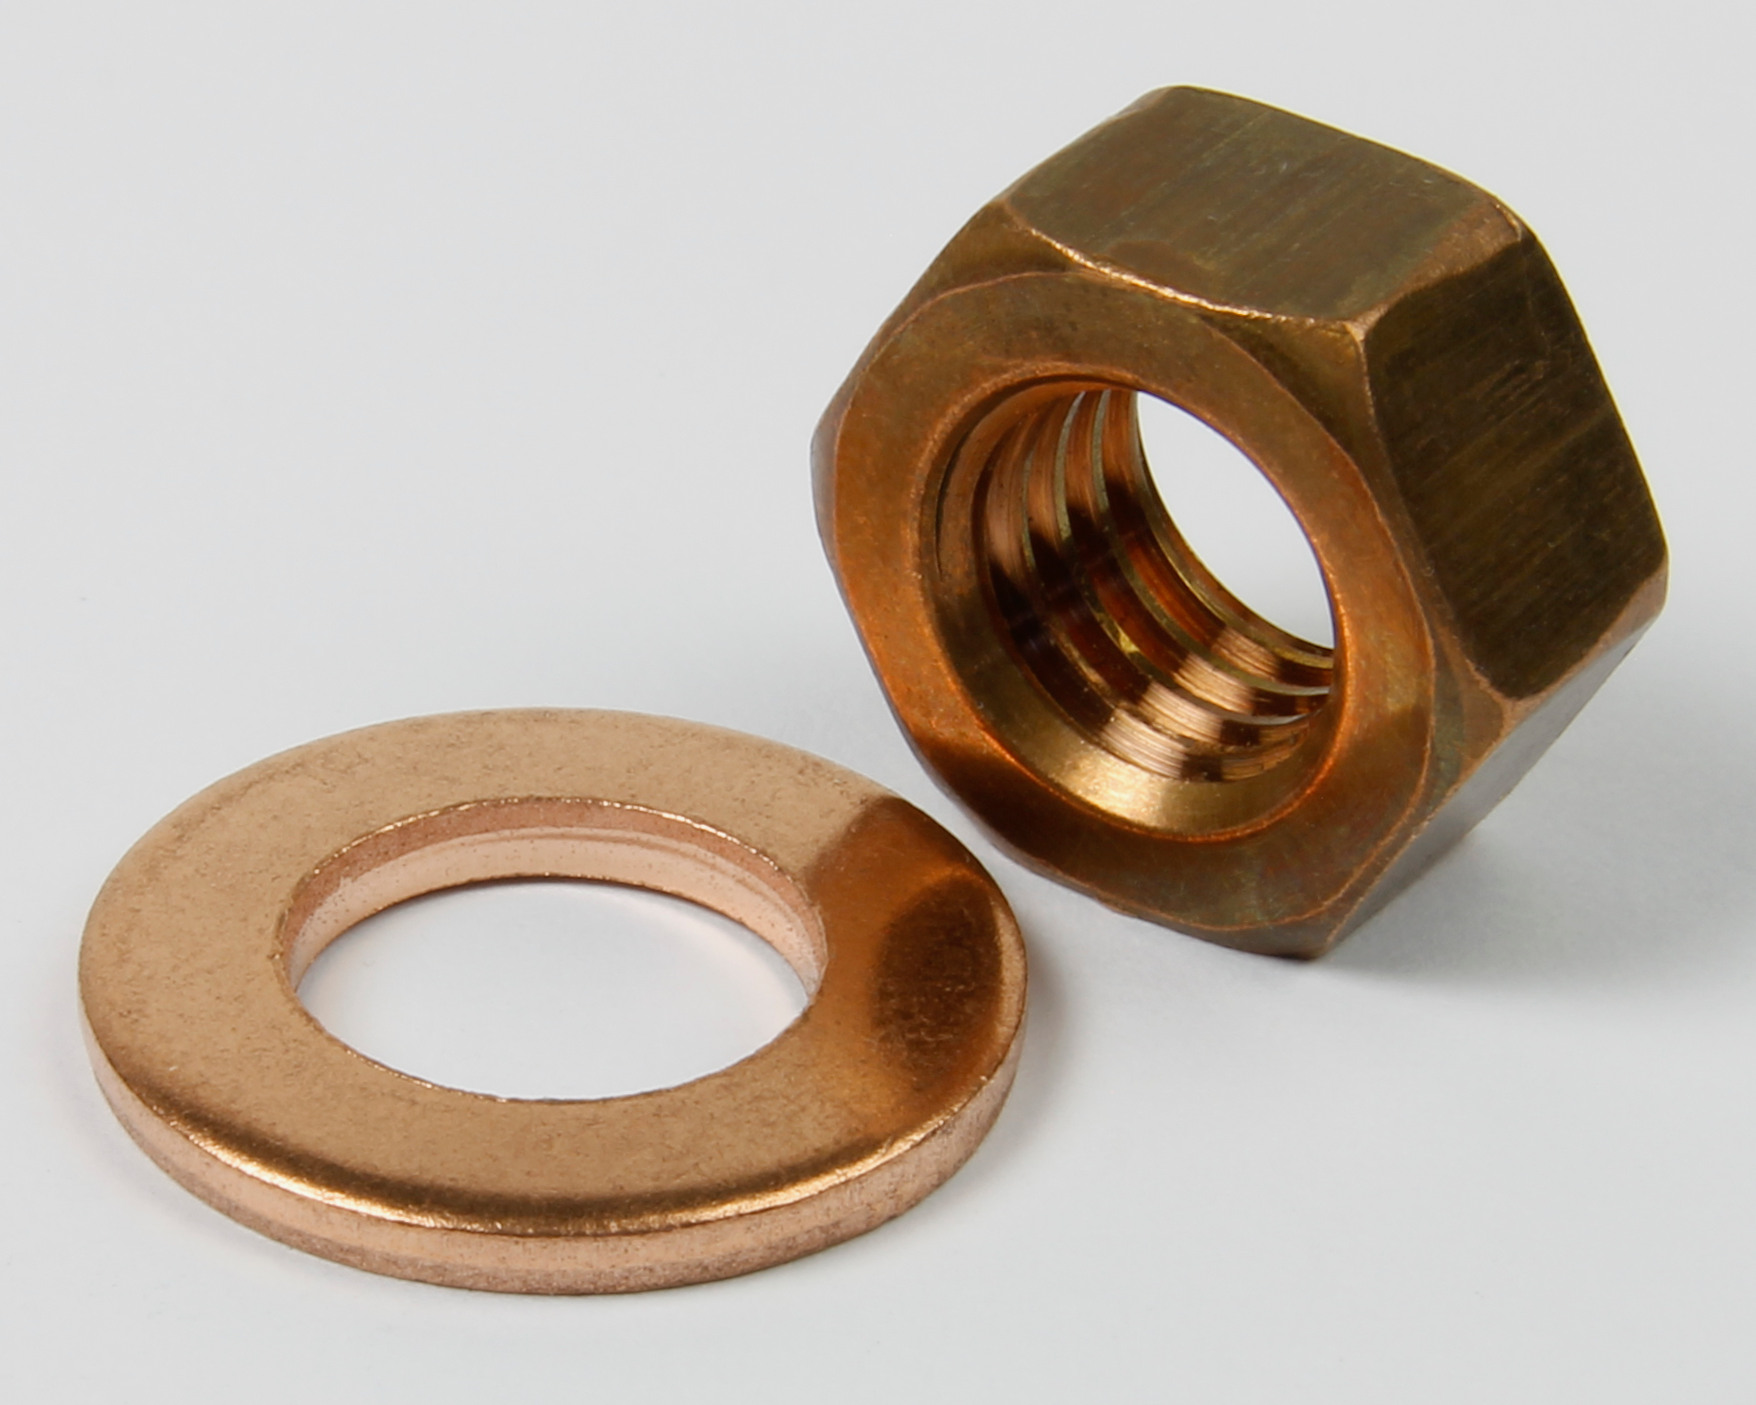 Copper nut and flat washer